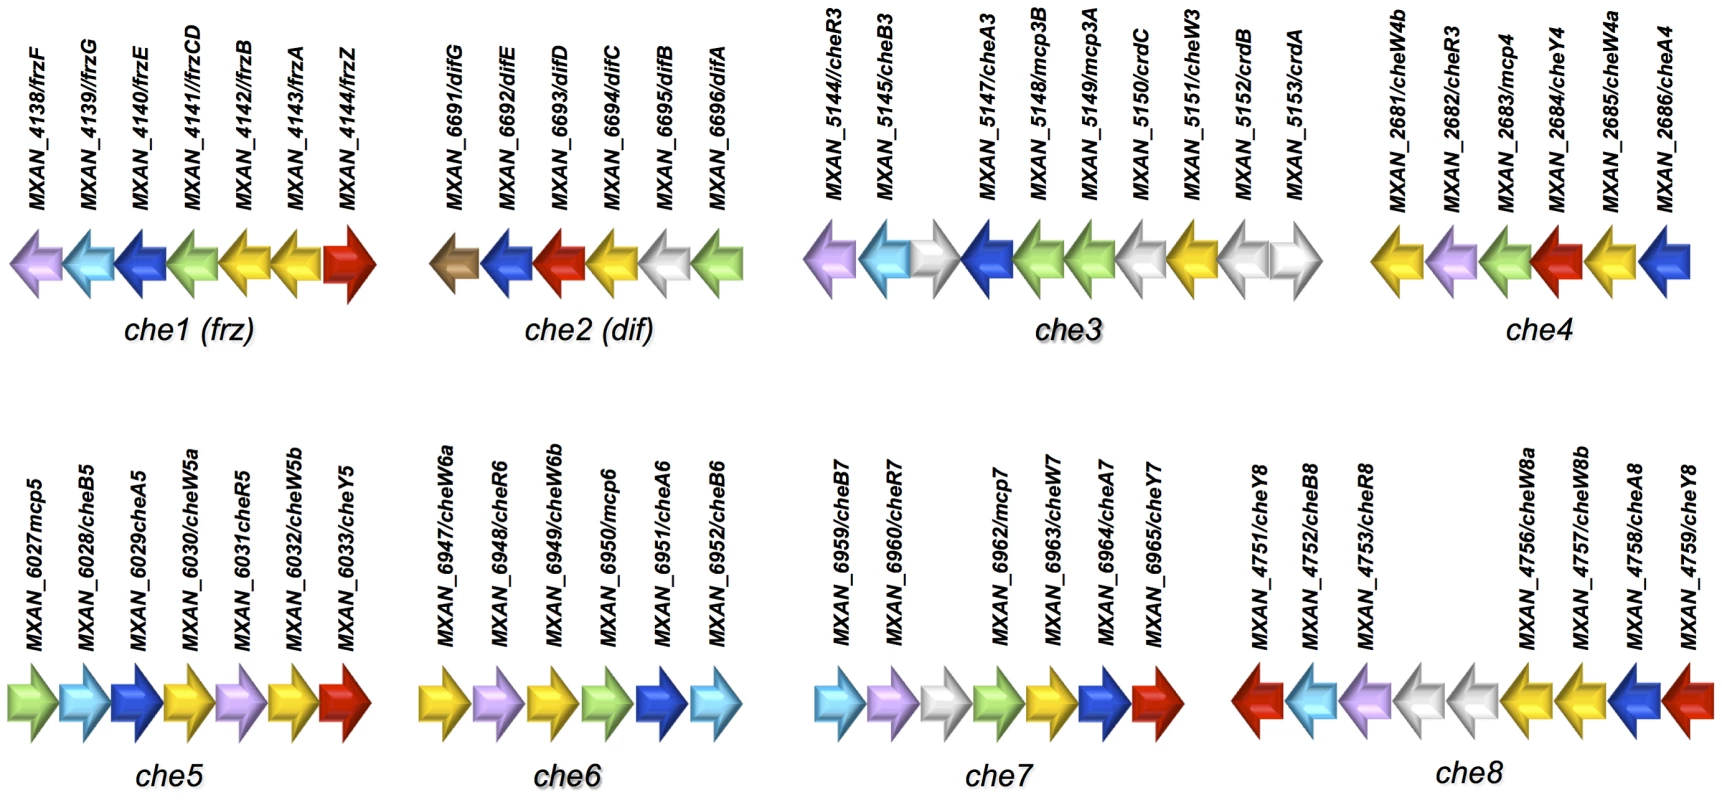 Genetic clusters carrying <i>che</i> genes in <i>M. xanthus</i>.